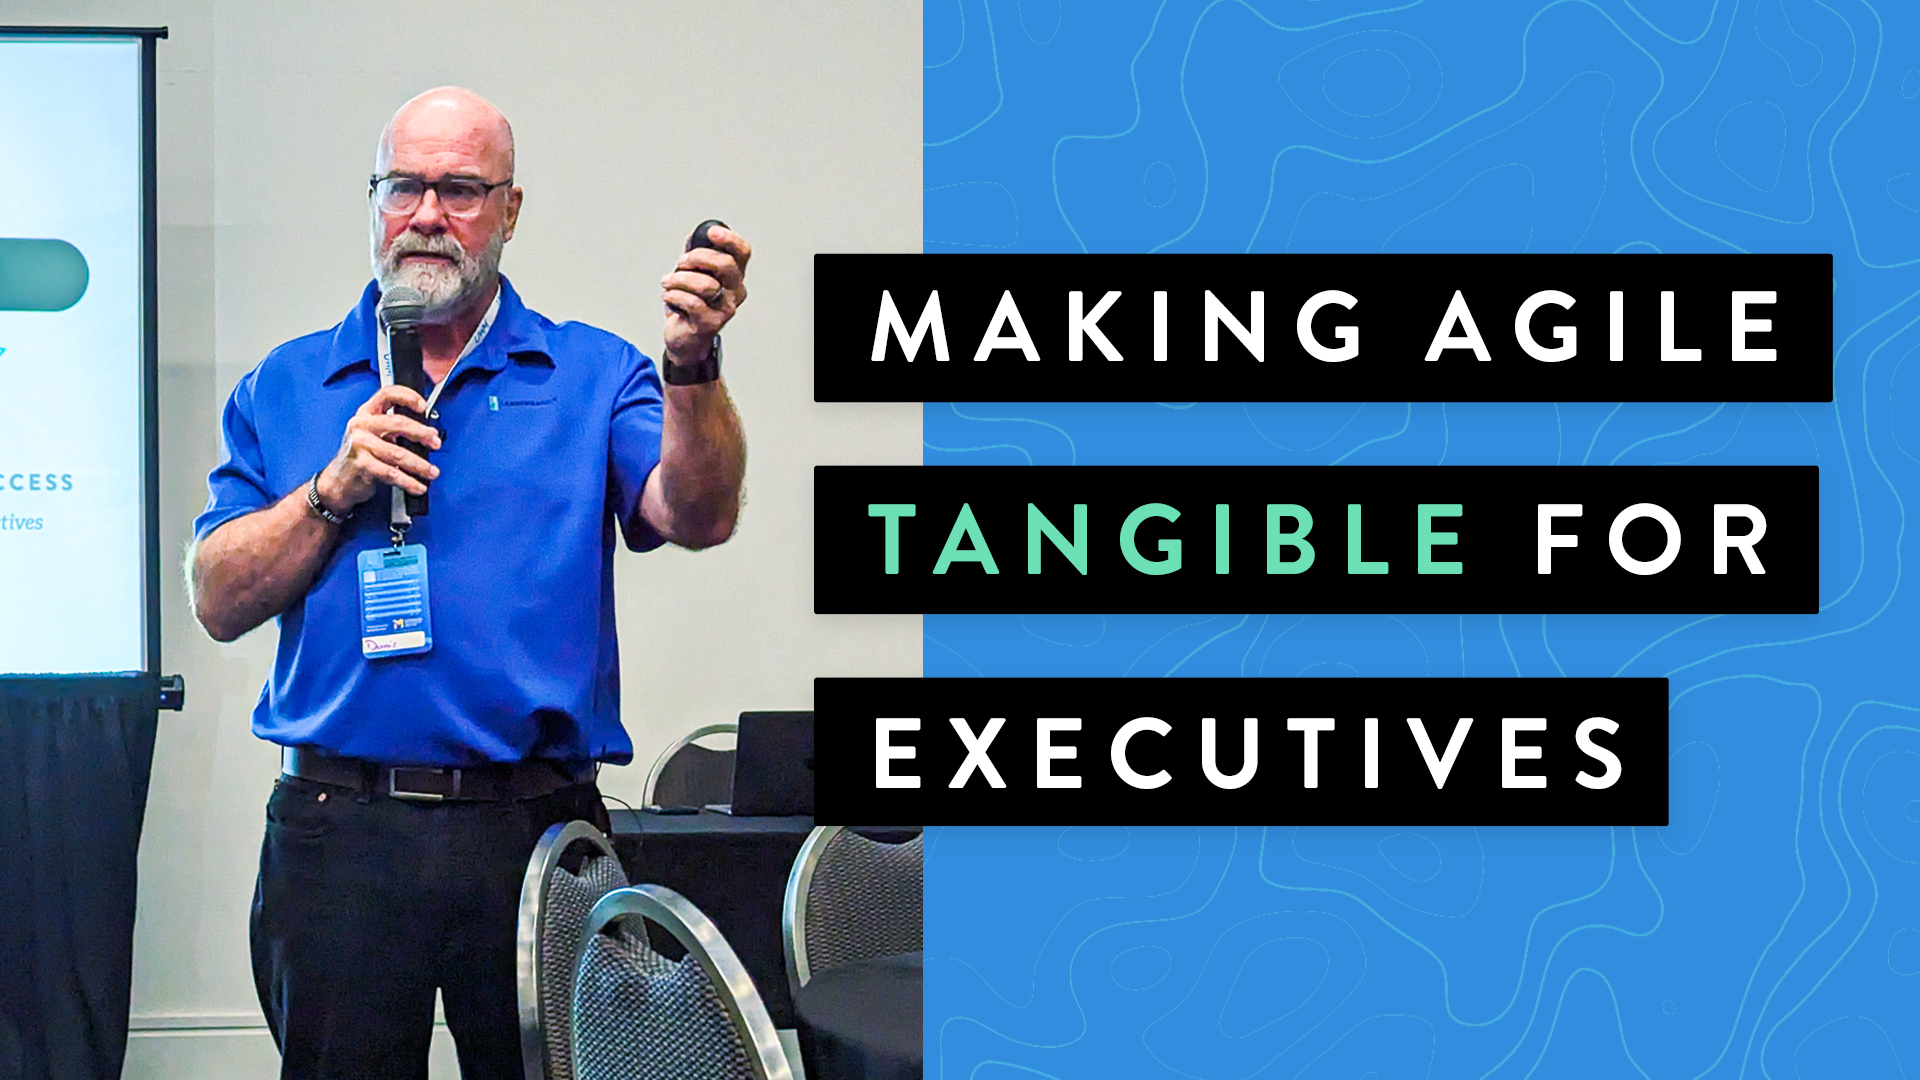 Making Agile Tangible for Executives